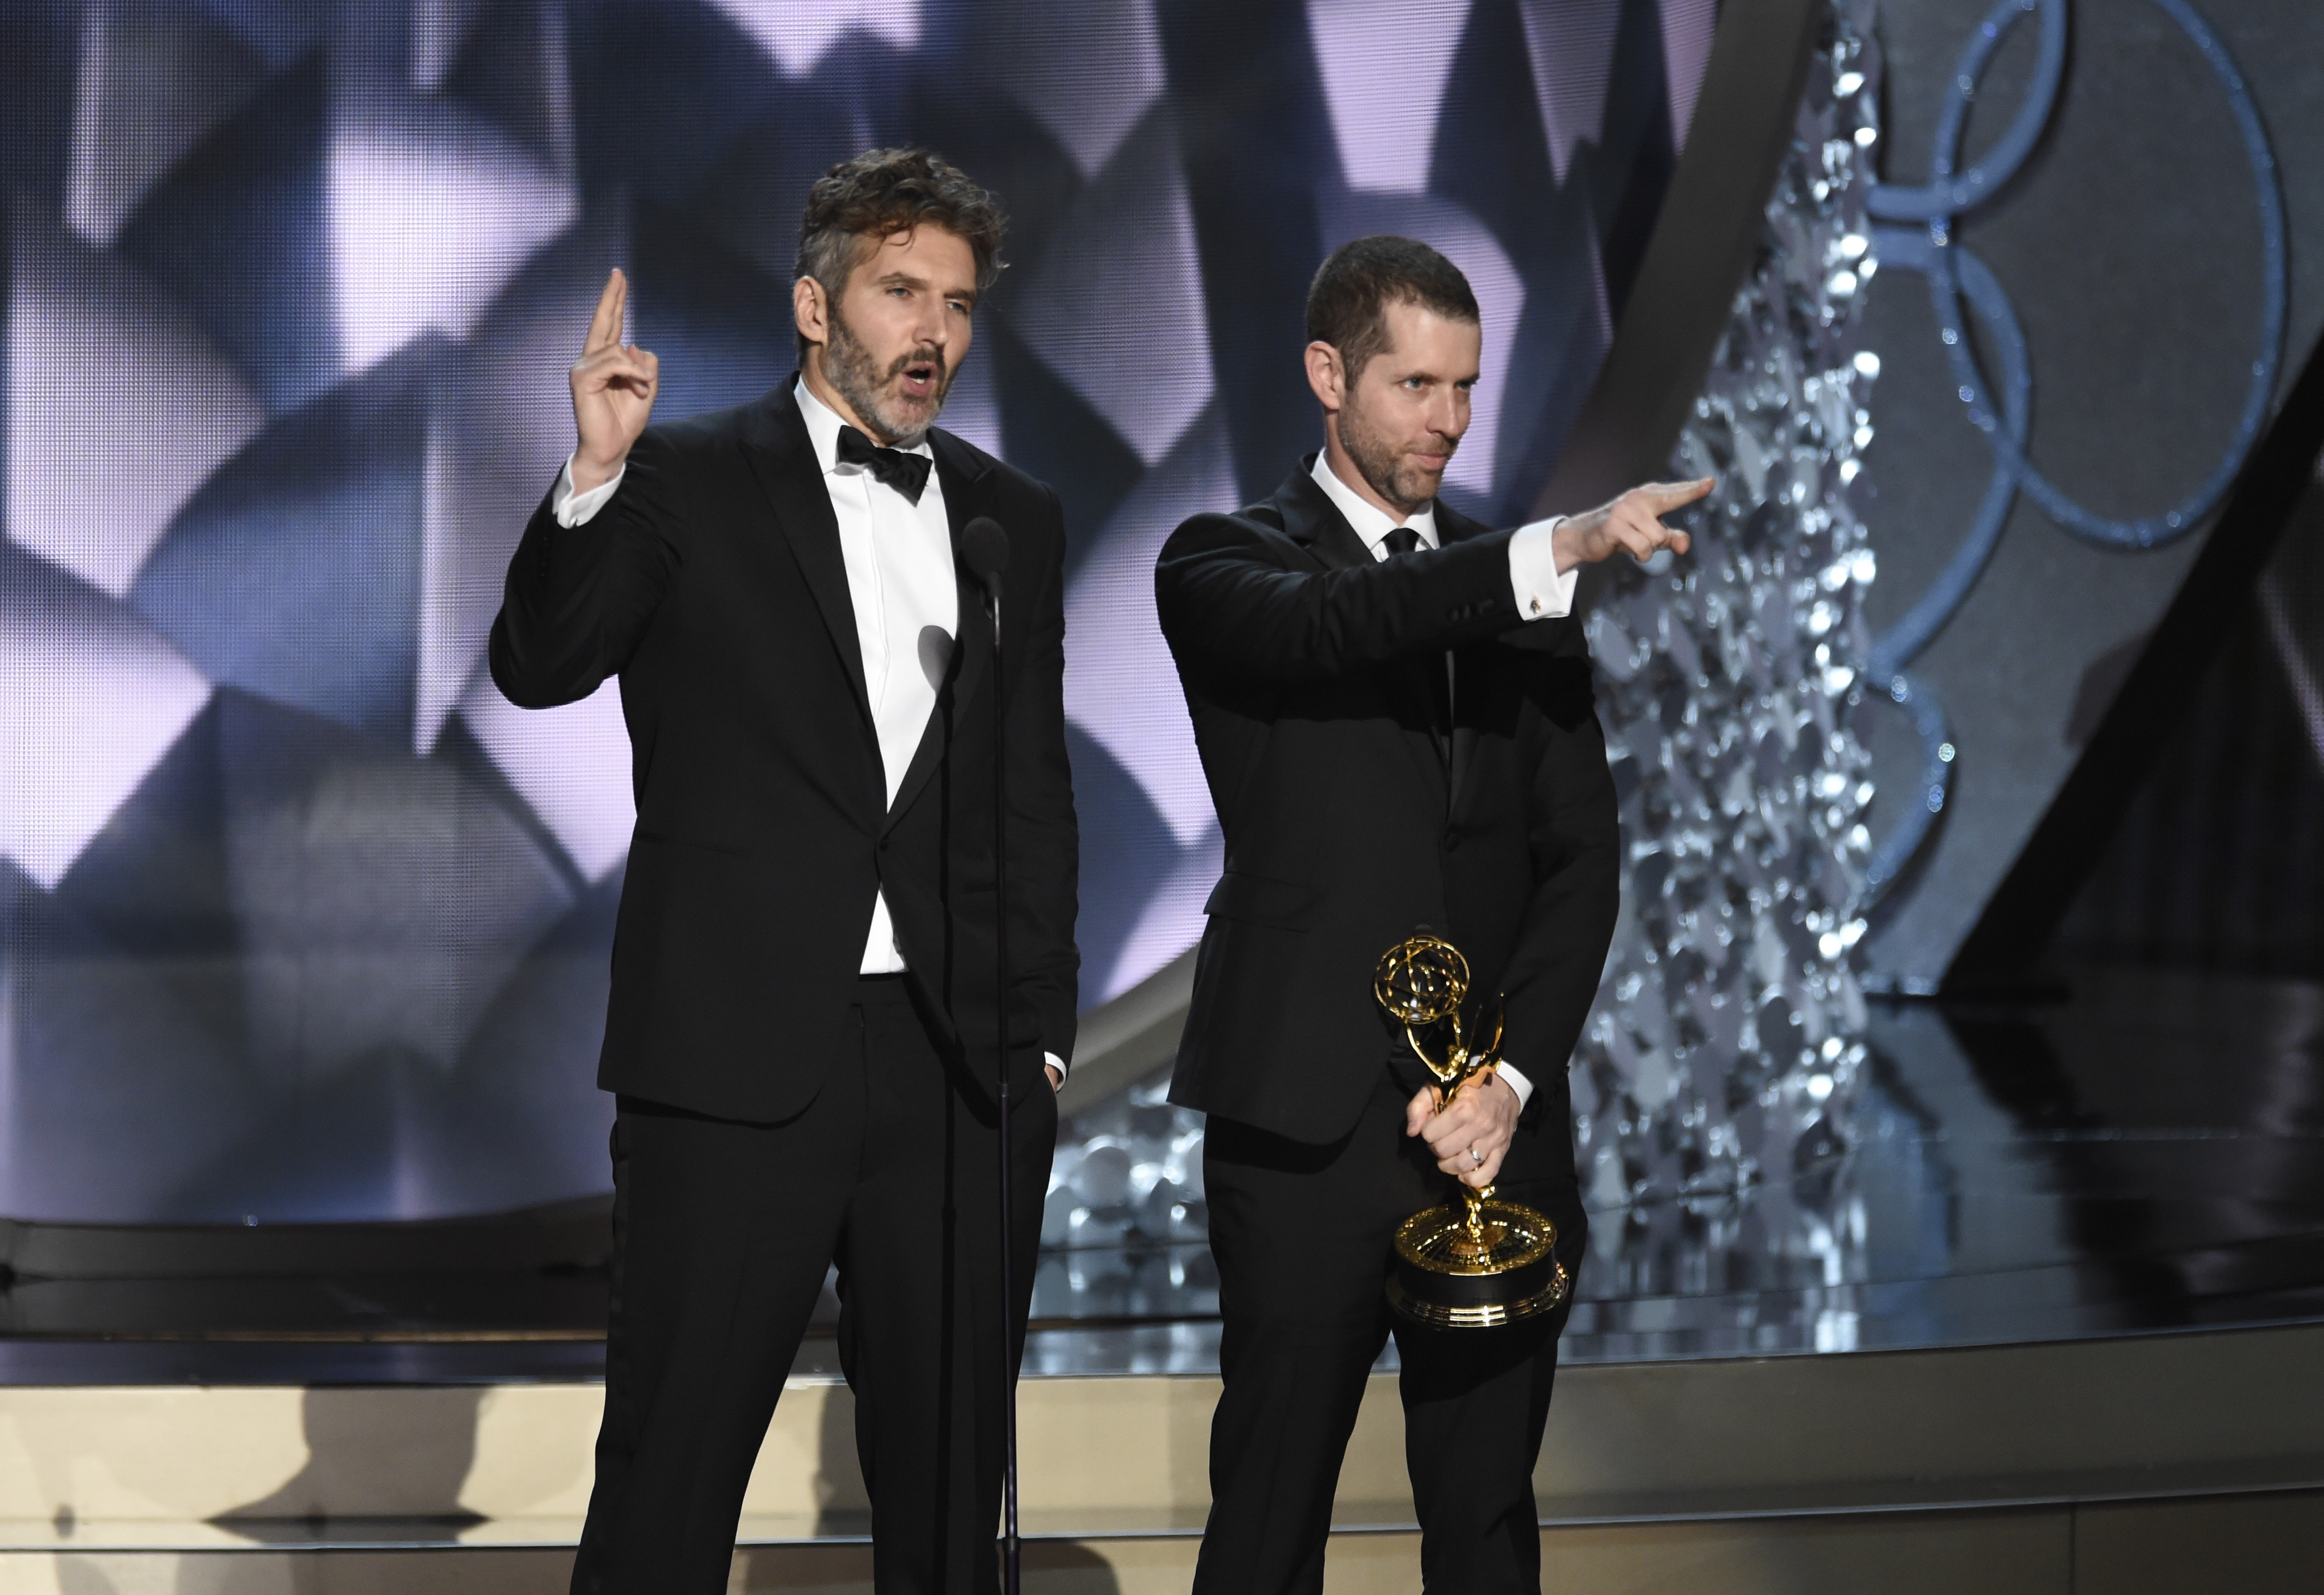 David Benioff, left, and D.B Weiss accept the award for outstanding writing for a drama series for Game of Thrones at the 68th Primetime Emmy Awards on Sunday, Sept. 18, 2016, at the Microsoft Theater in Los Angeles. (Photo by Chris Pizzello/Invision/AP)